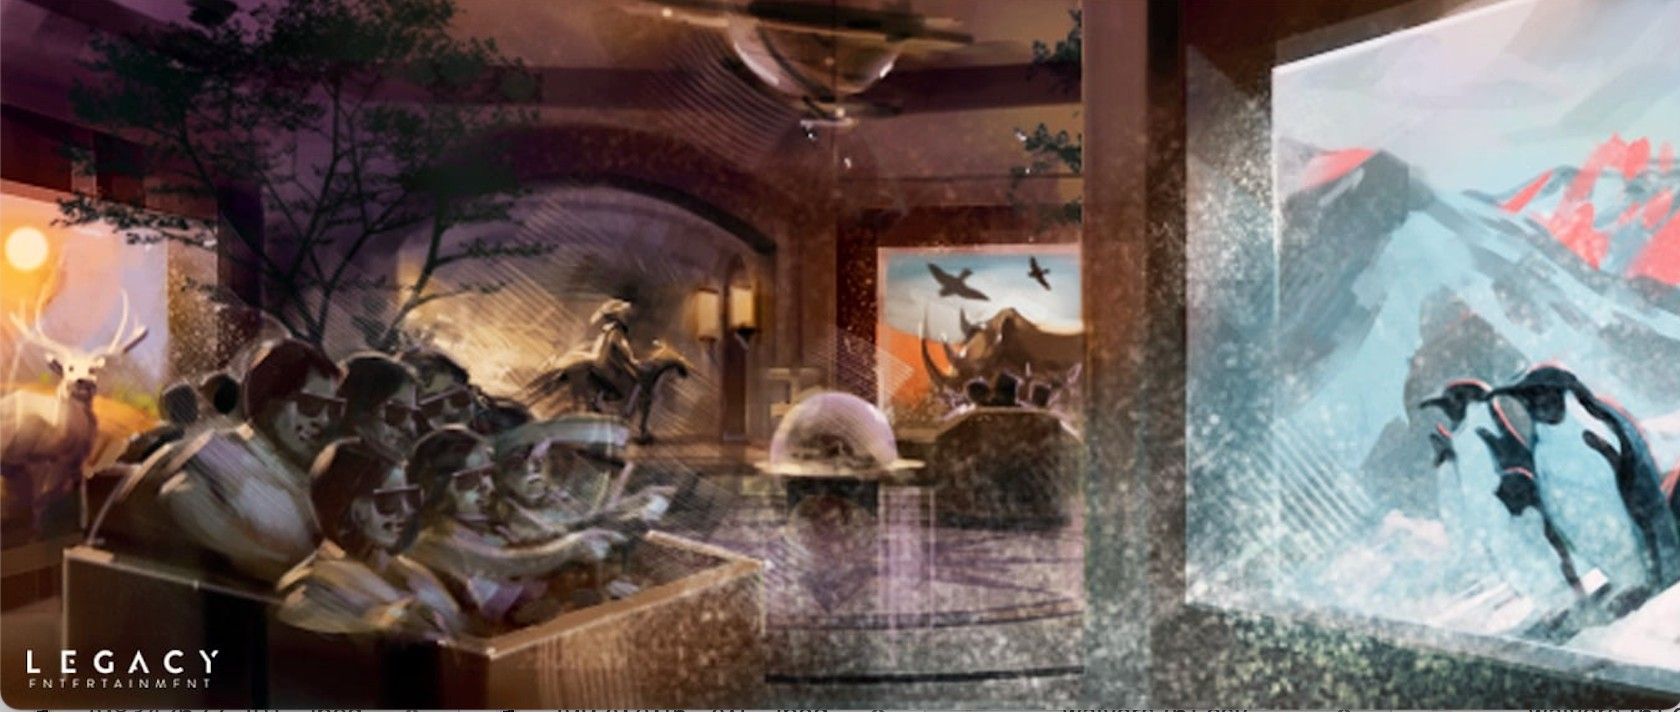 Night at the Museum Ride Concept Art